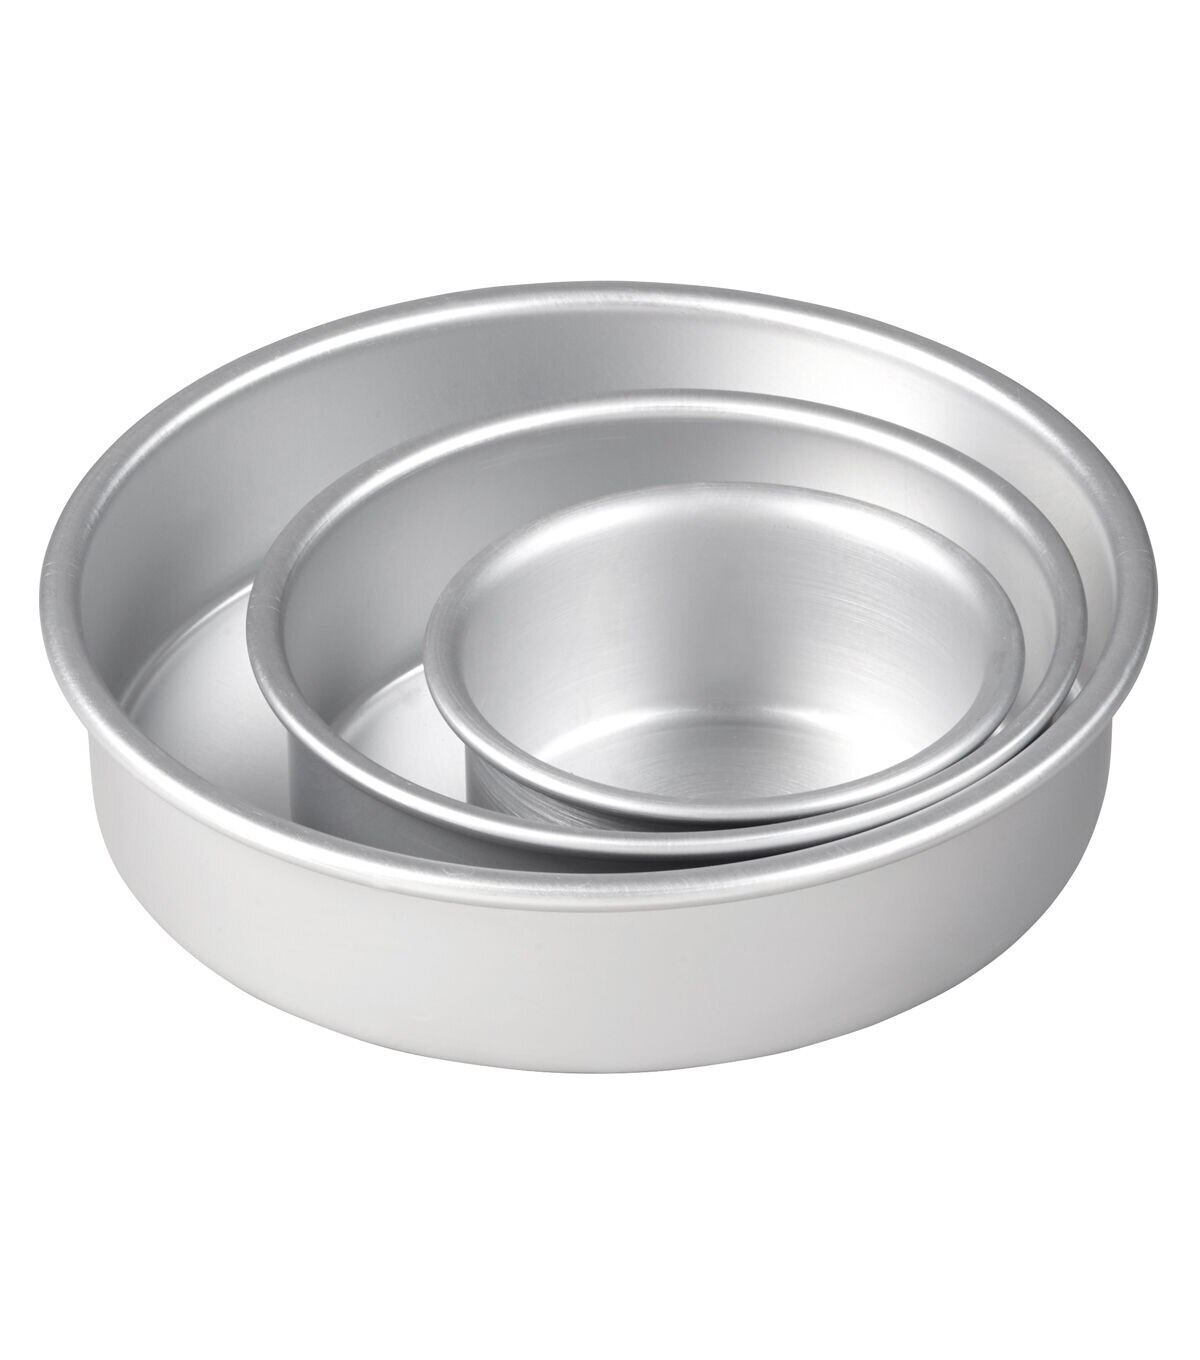 Round Cake Tin Set with Loose Base 2 Pack 4-Inch Non-Stick Baking Tins Deep Aluminum Round Cake Pan with Removable Bottom for Wedding/Birthday/Christmas Cake Baking Silver